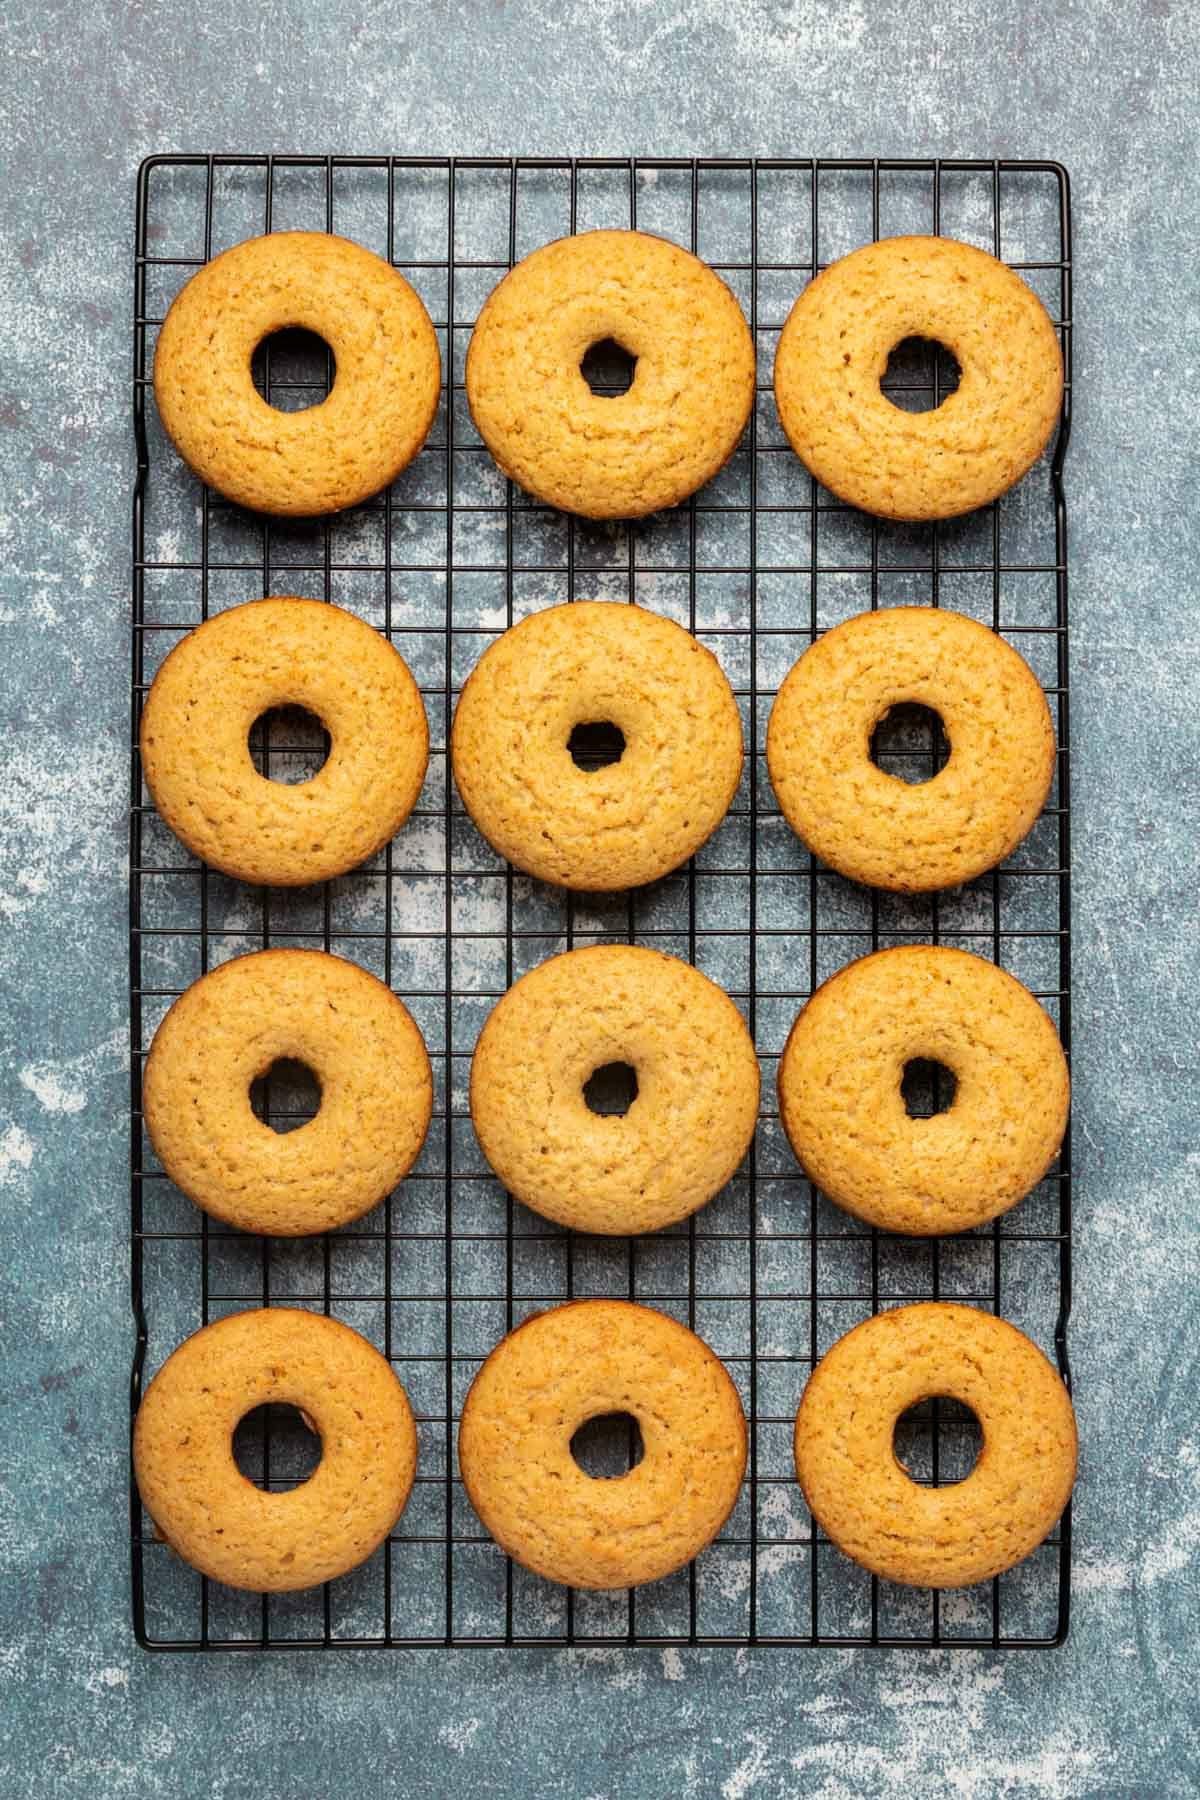 Donuts cooling on a wire cooling rack.